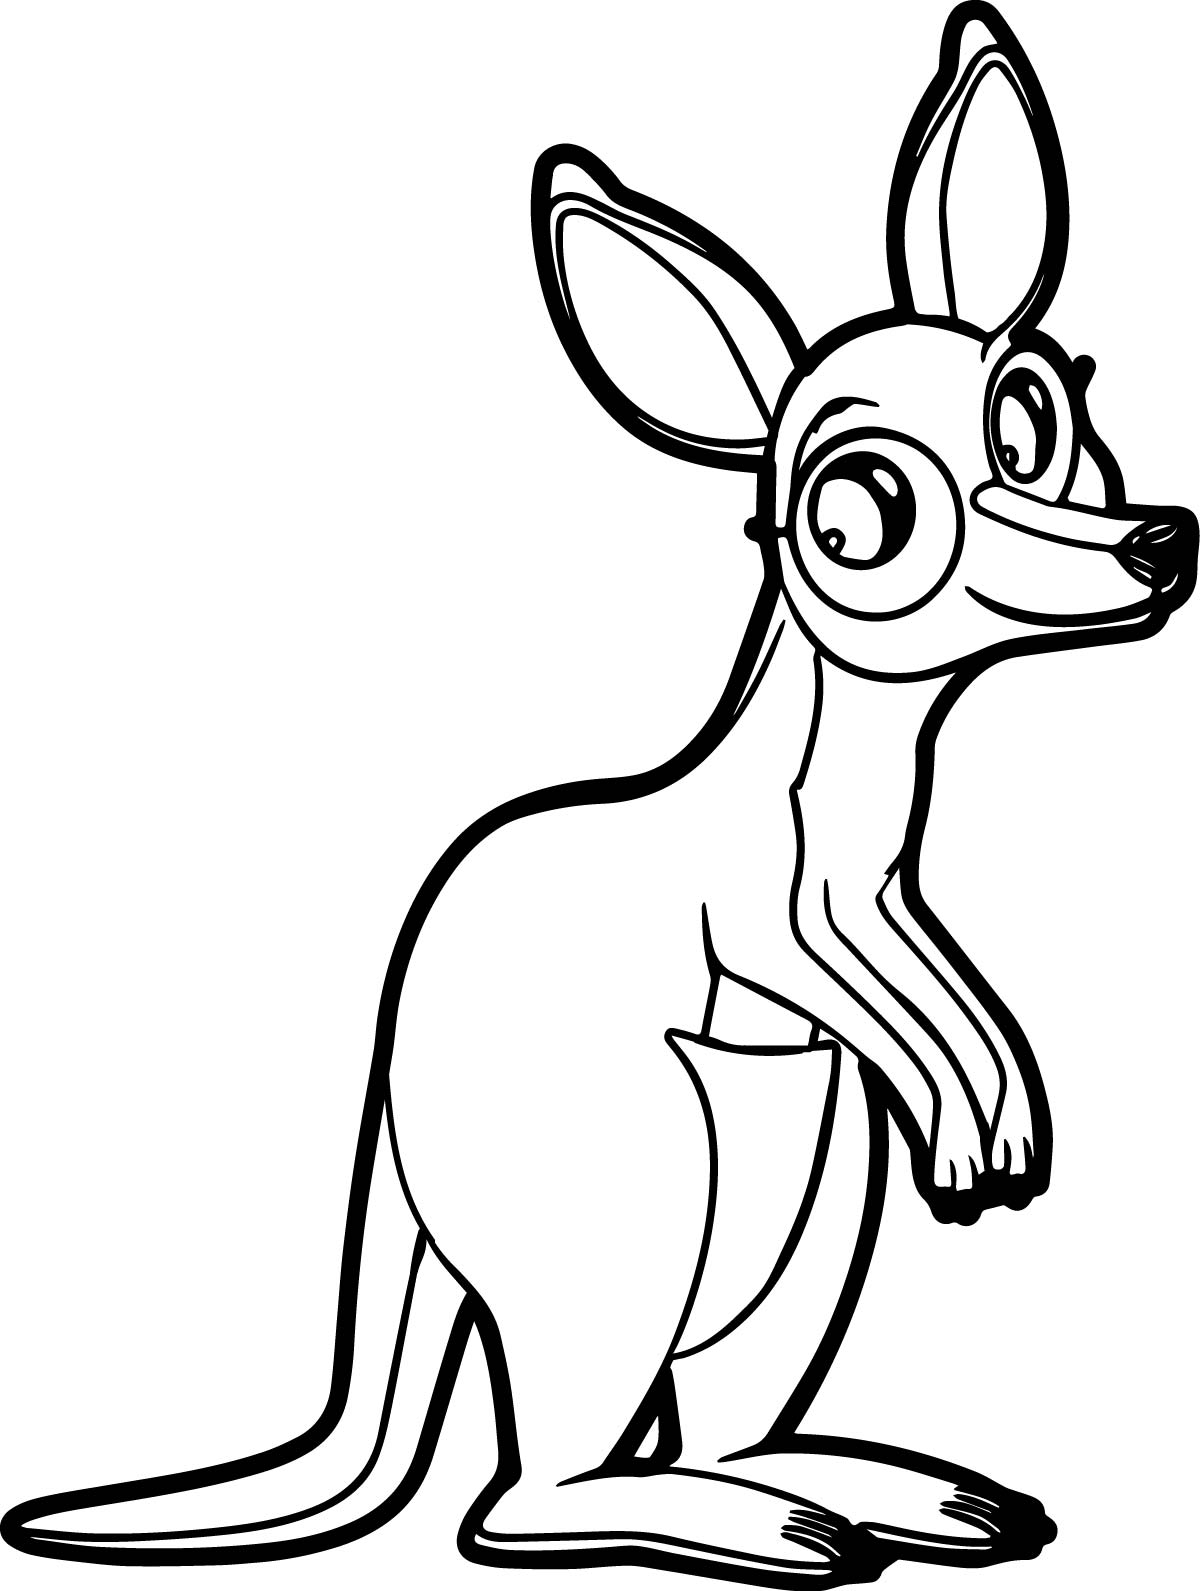 Kangaroo Coloring Pages For Kids at GetColorings.com  Free printable